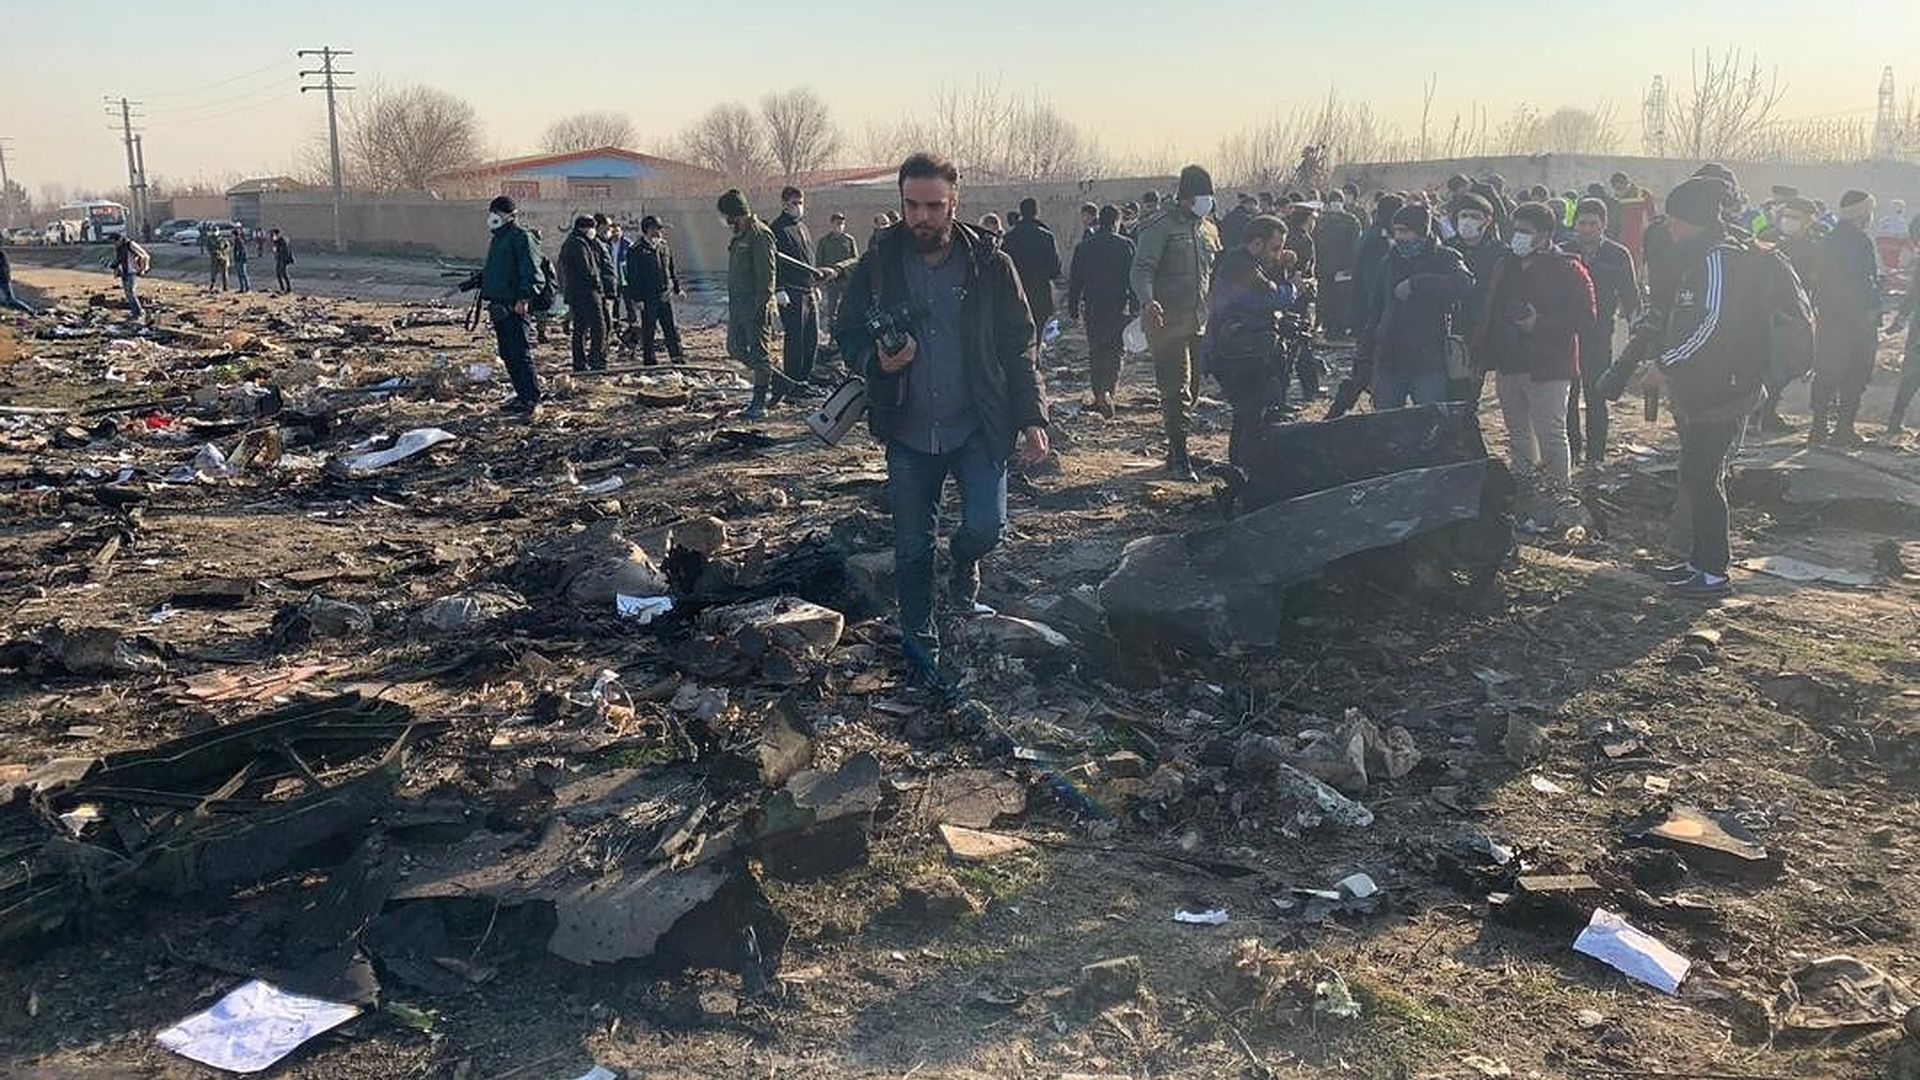 Search and rescue works are conducted at site after a Boeing 737 plane belonging to a Ukrainian airline crashed near Imam Khomeini Airport in Iran